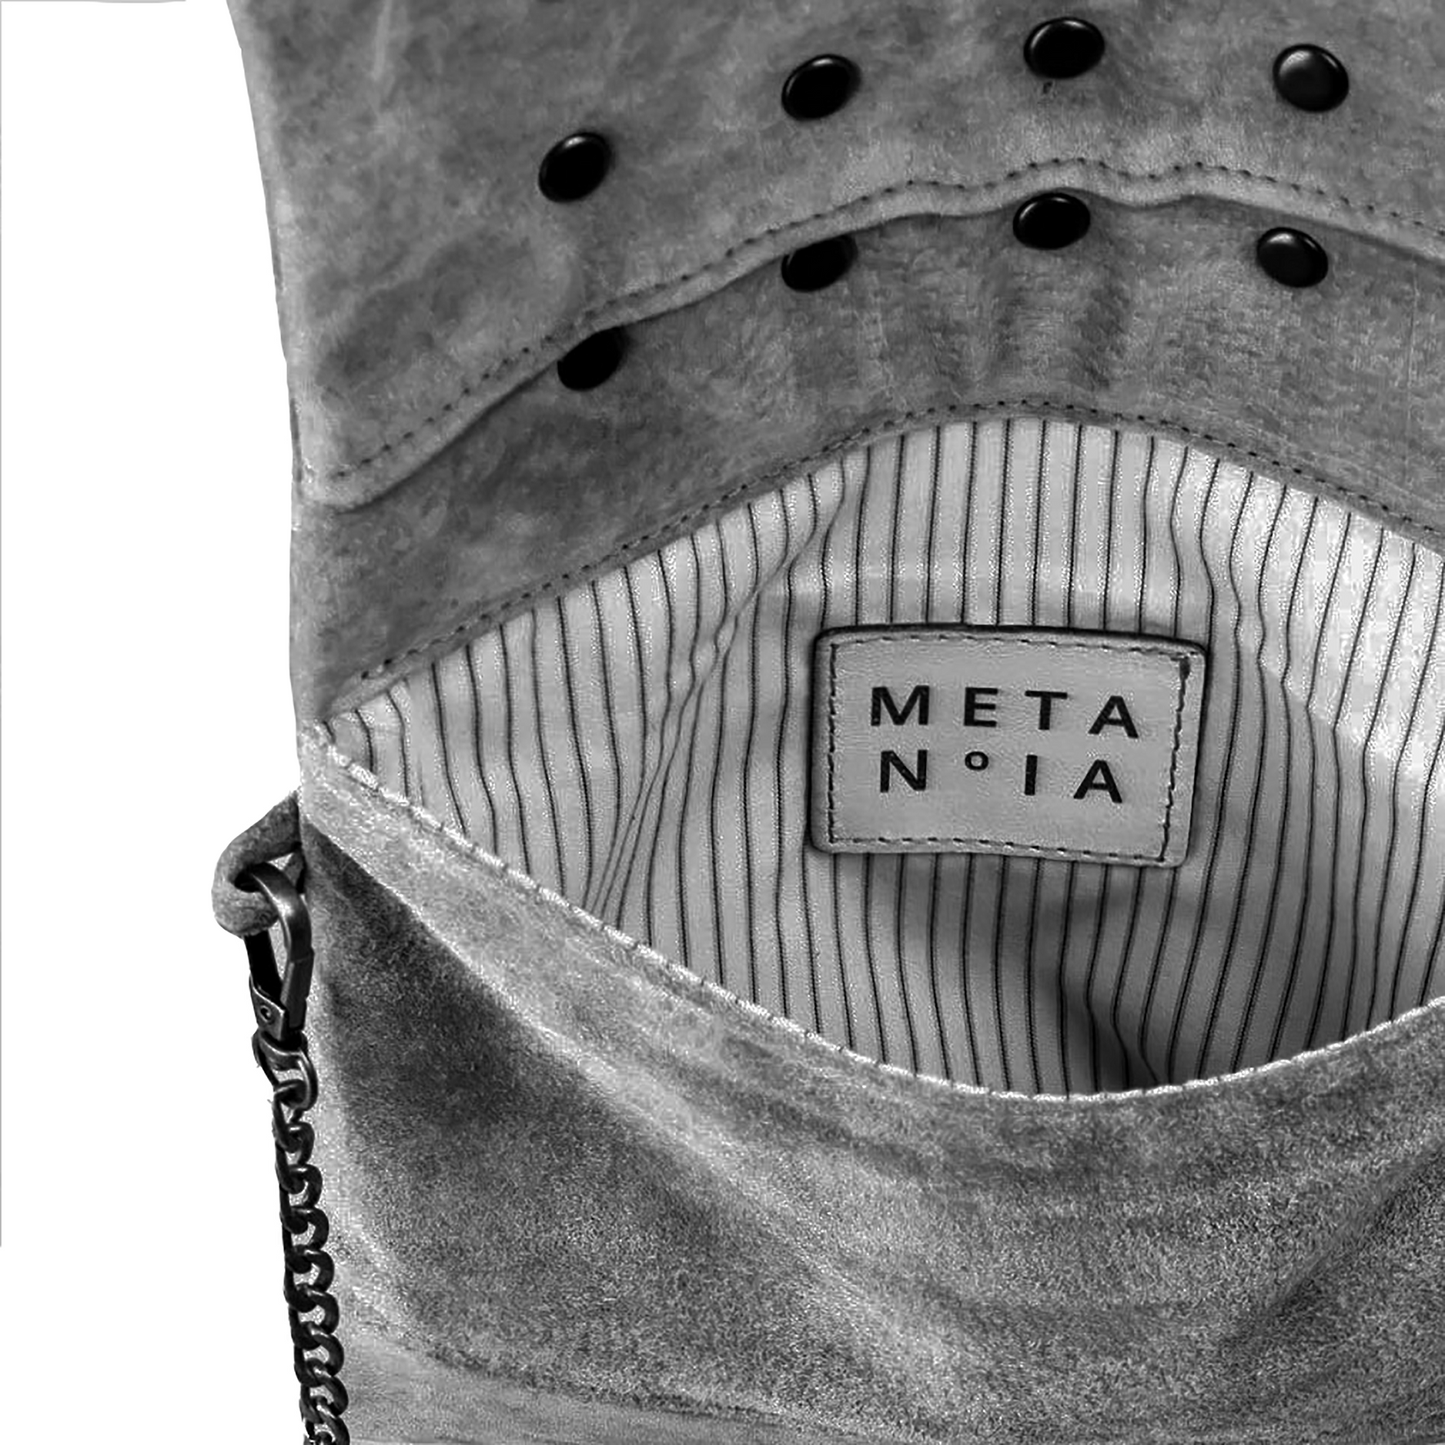 METANoIA The Cross Small Bag inside featuring pinstripe fabric sourced from recycled fabric and a caramel leather woven label lasered with the iconic METANoIA label.